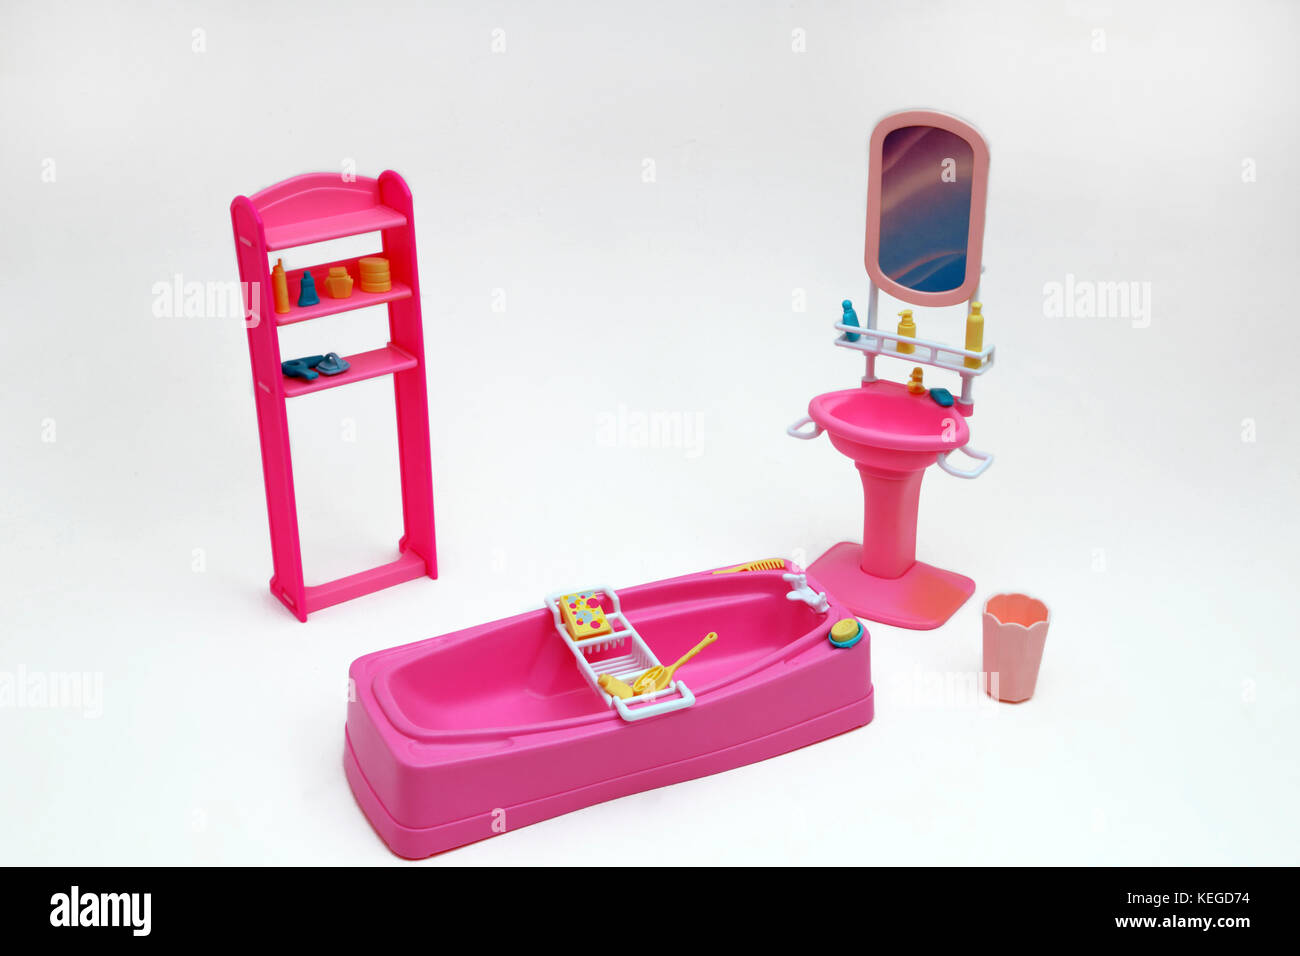 Vintage 1990's Barbie 'So Much To Do'  Bathroom Set Stock Photo